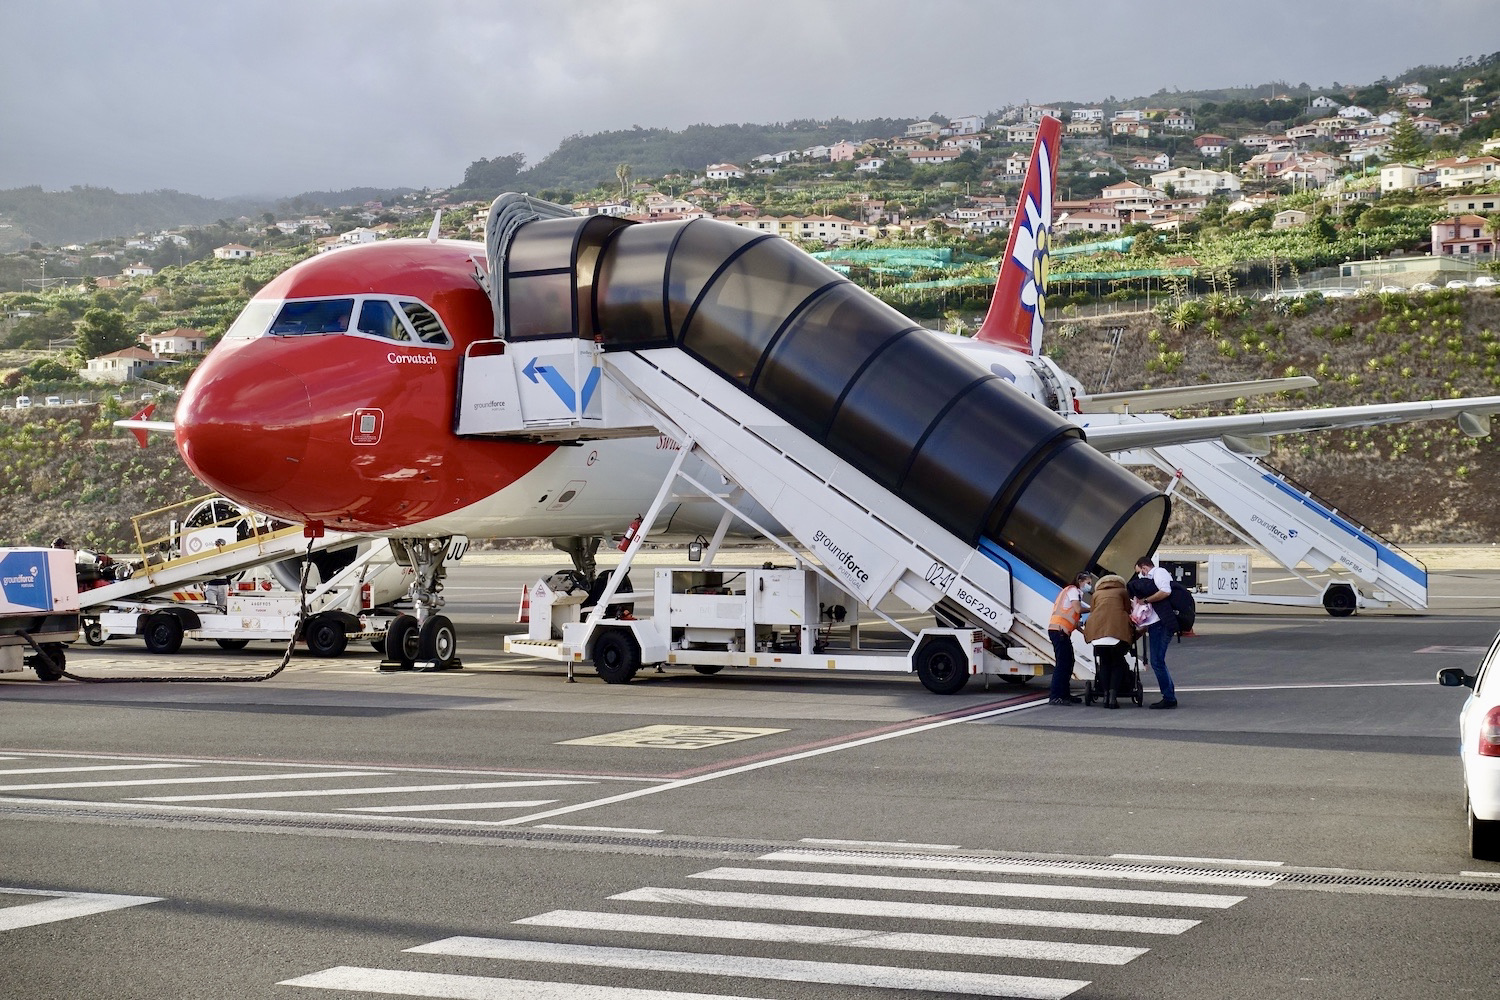 Swiss Edelweiss airplane at Madeira's airport